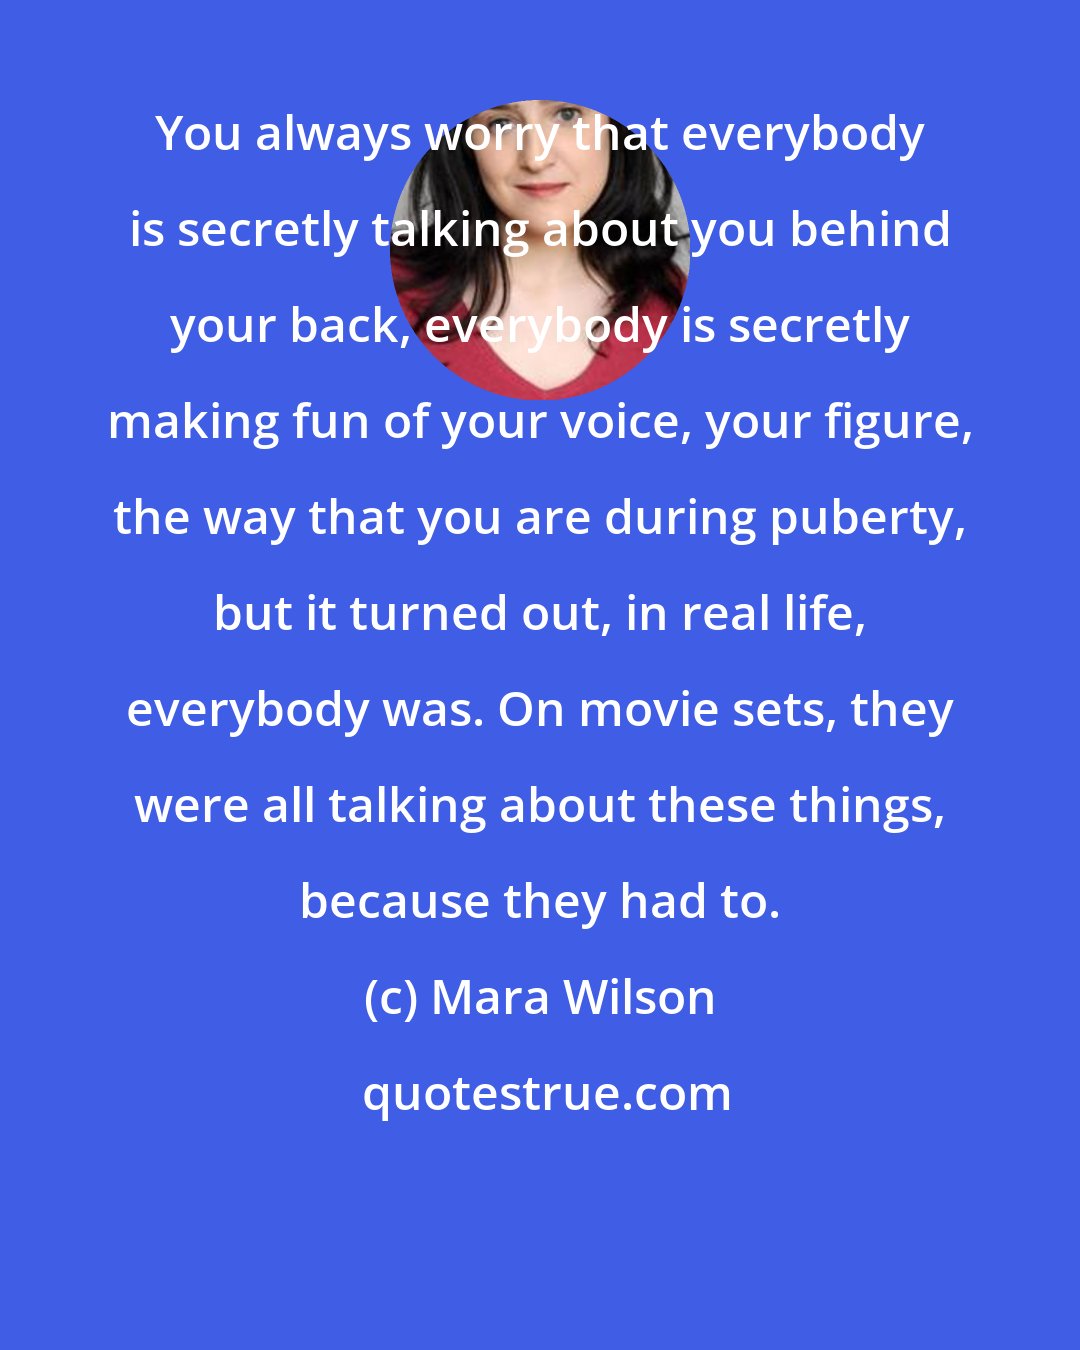 Mara Wilson: You always worry that everybody is secretly talking about you behind your back, everybody is secretly making fun of your voice, your figure, the way that you are during puberty, but it turned out, in real life, everybody was. On movie sets, they were all talking about these things, because they had to.